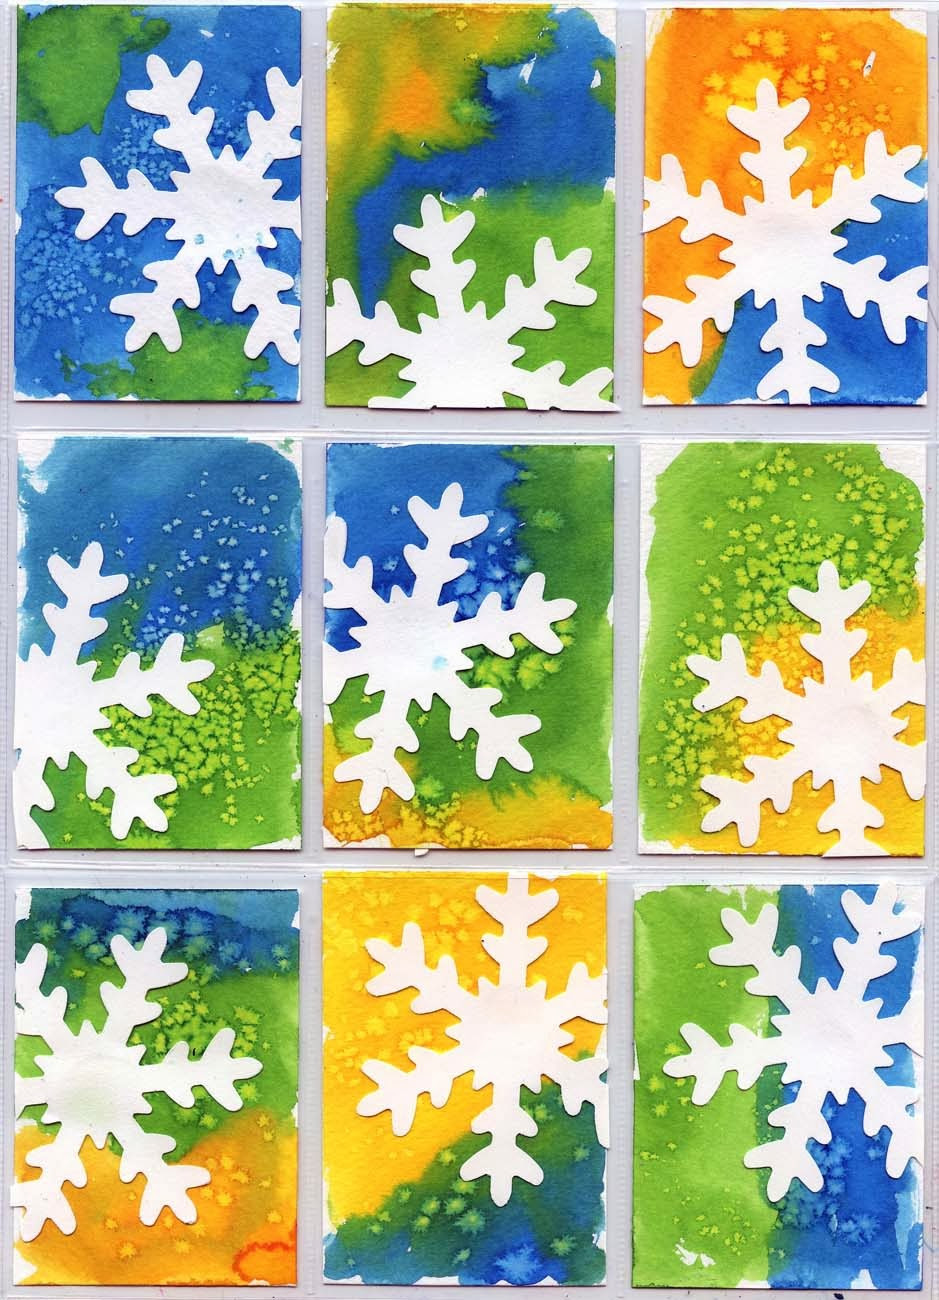 January Craft For Toddlers
 Snowflake ATC Art Projects for Kids